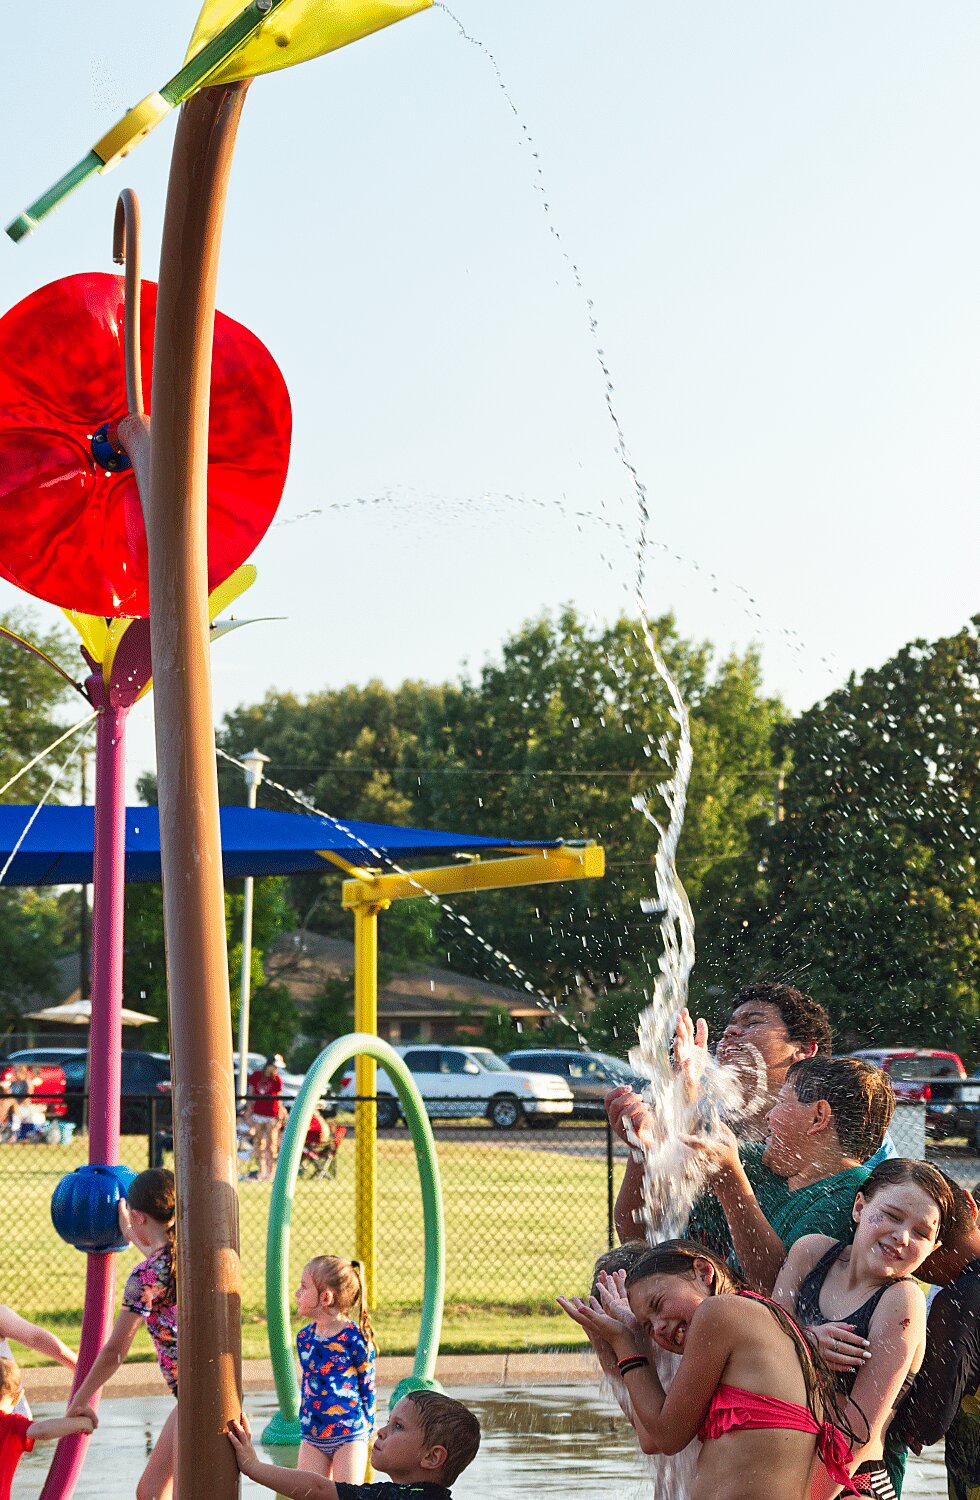 A dose of water was a welcome remedy to the summer heat. [peep plenty more patriotic photos]